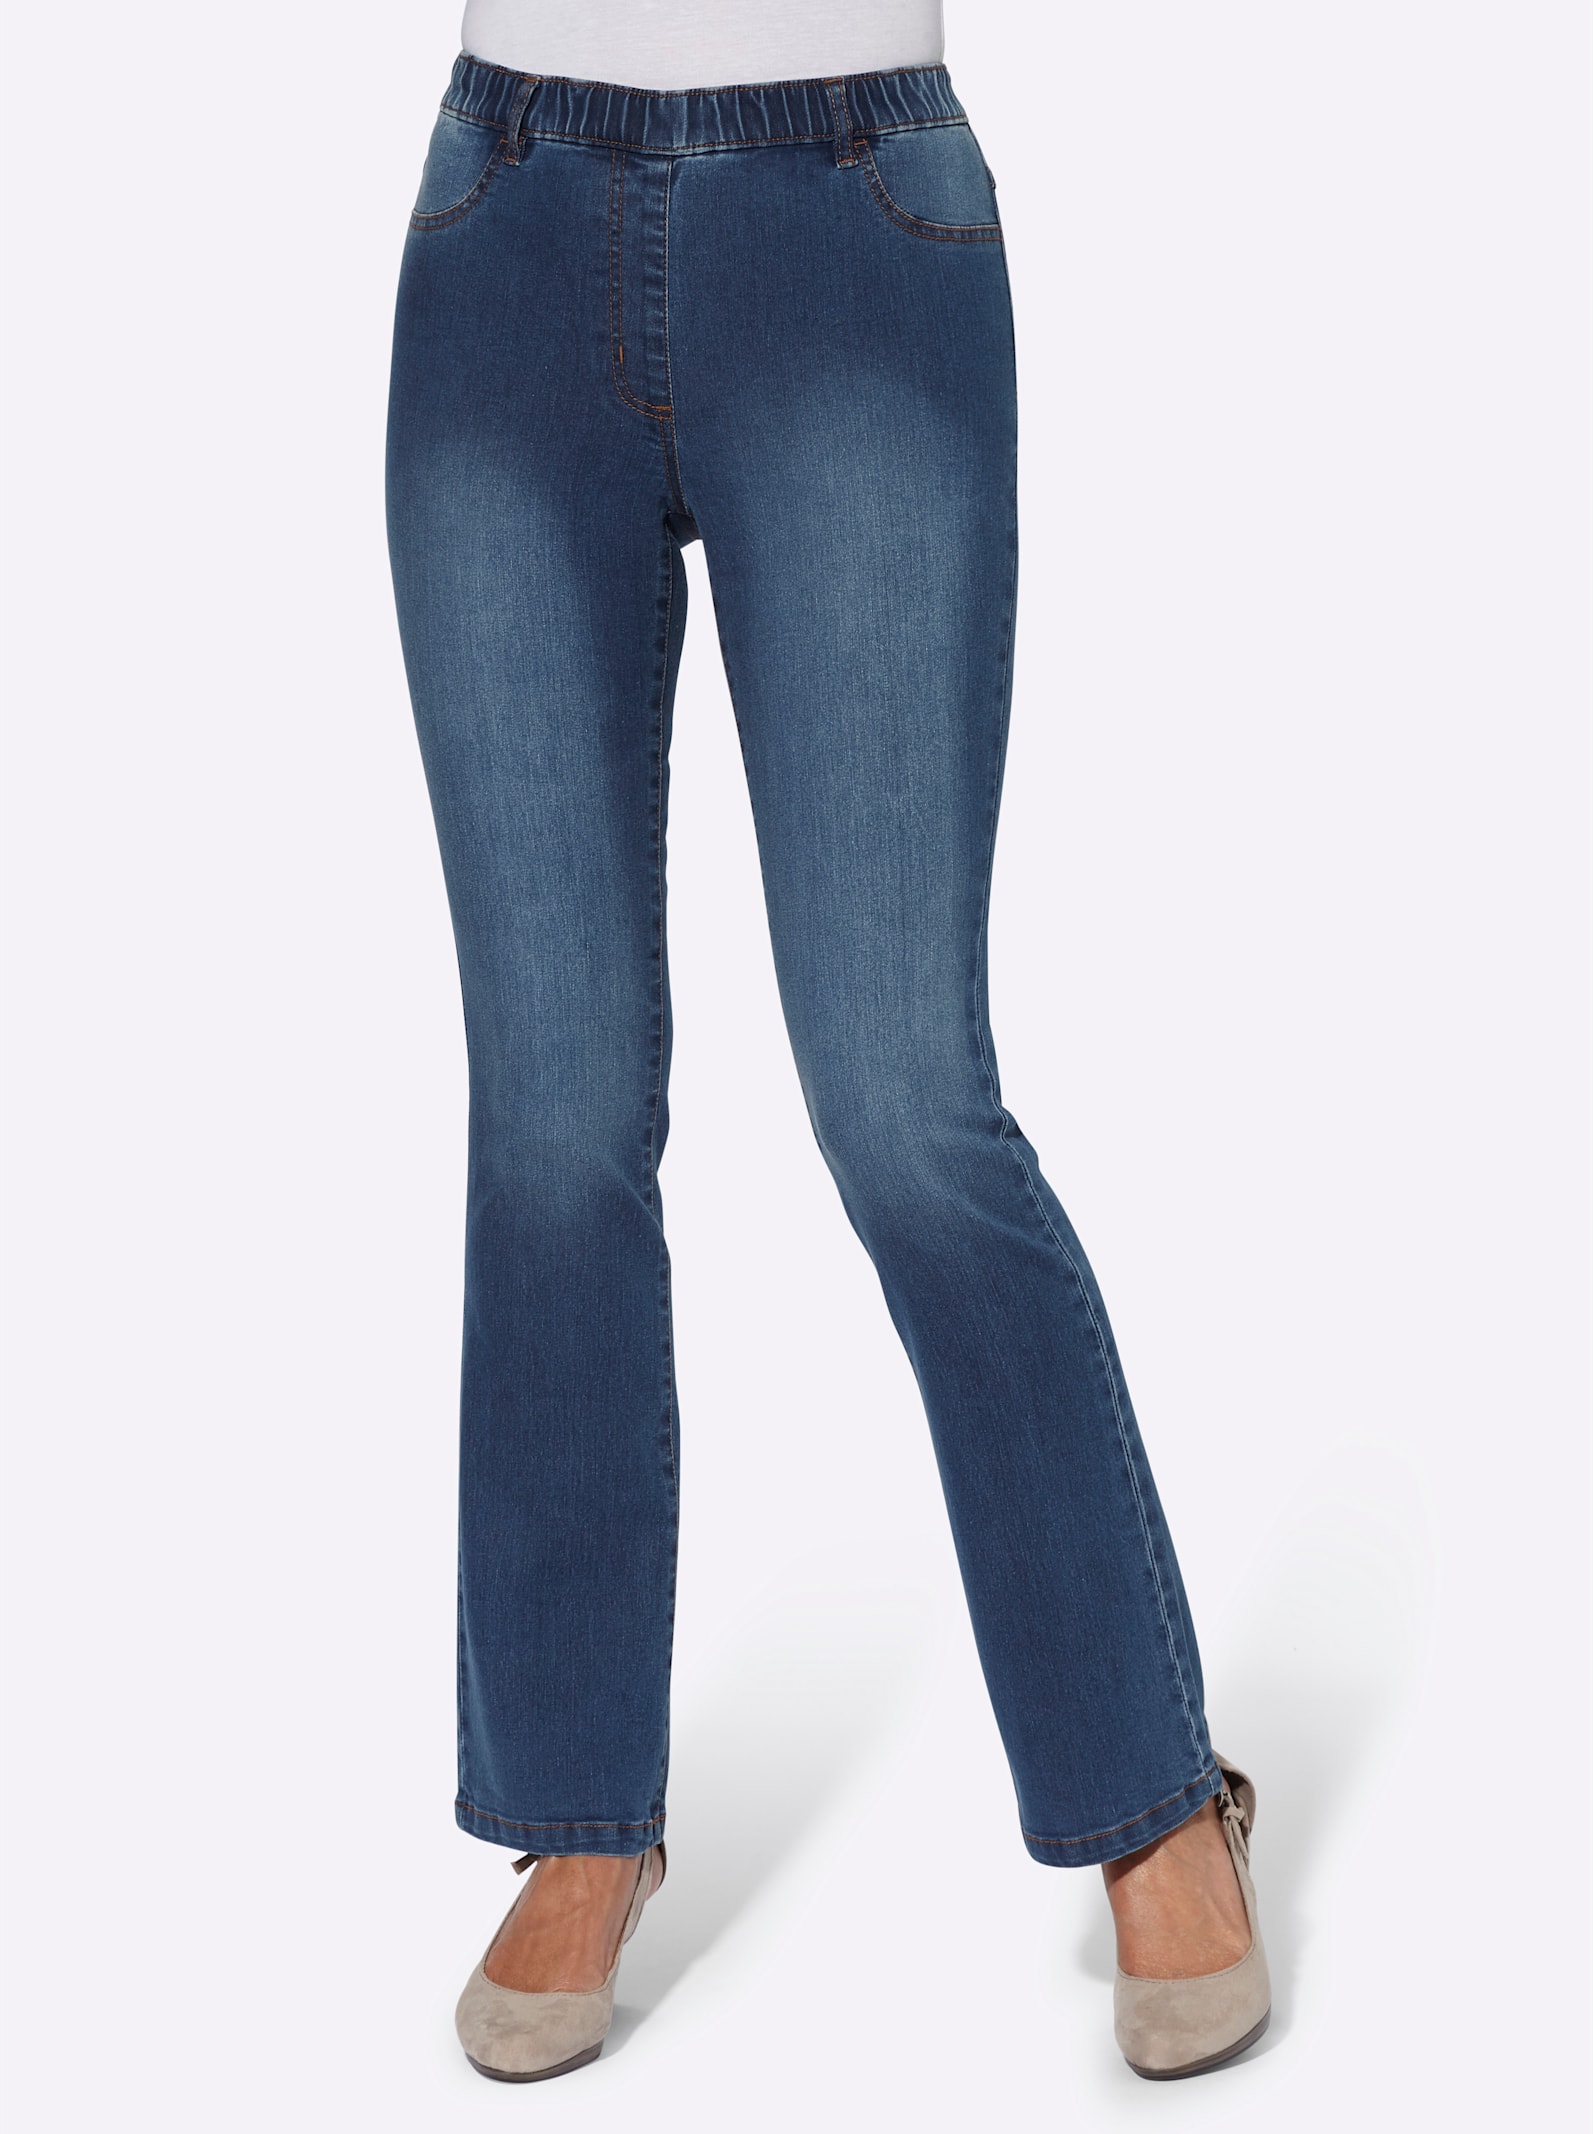 Vidjeans - blue-stone-washed